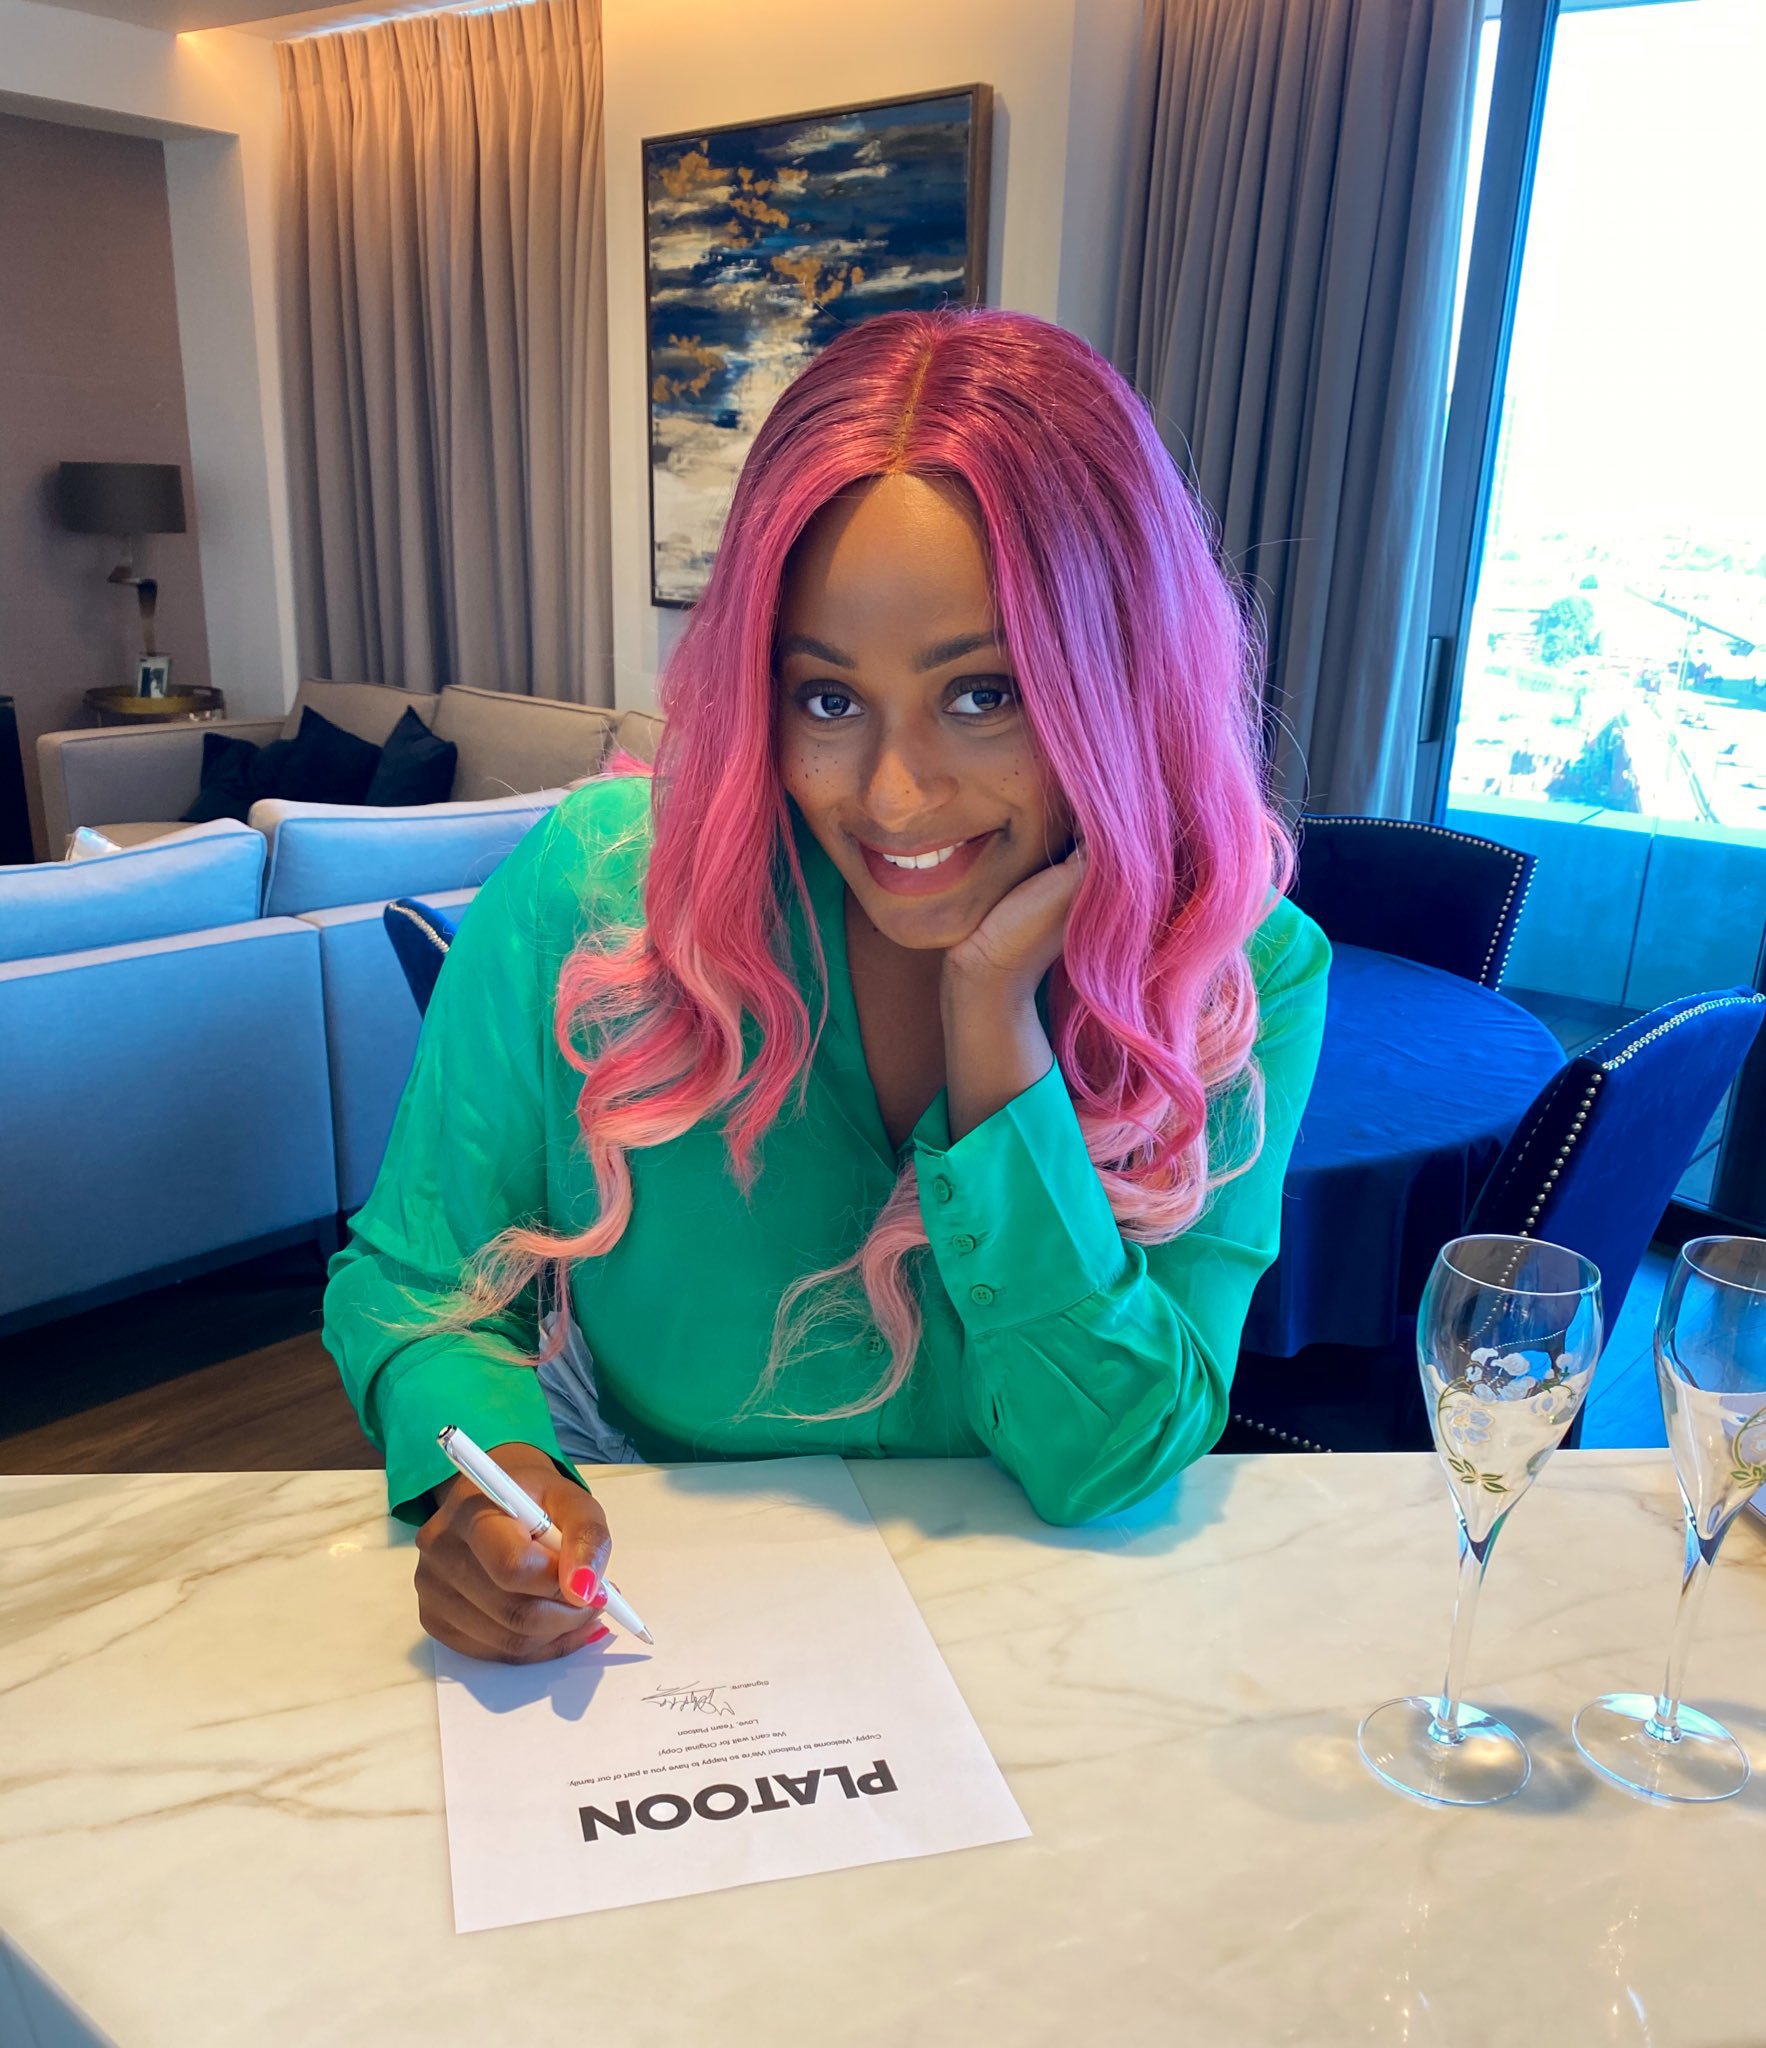 DJ Cuppy signs music deal with Platoon